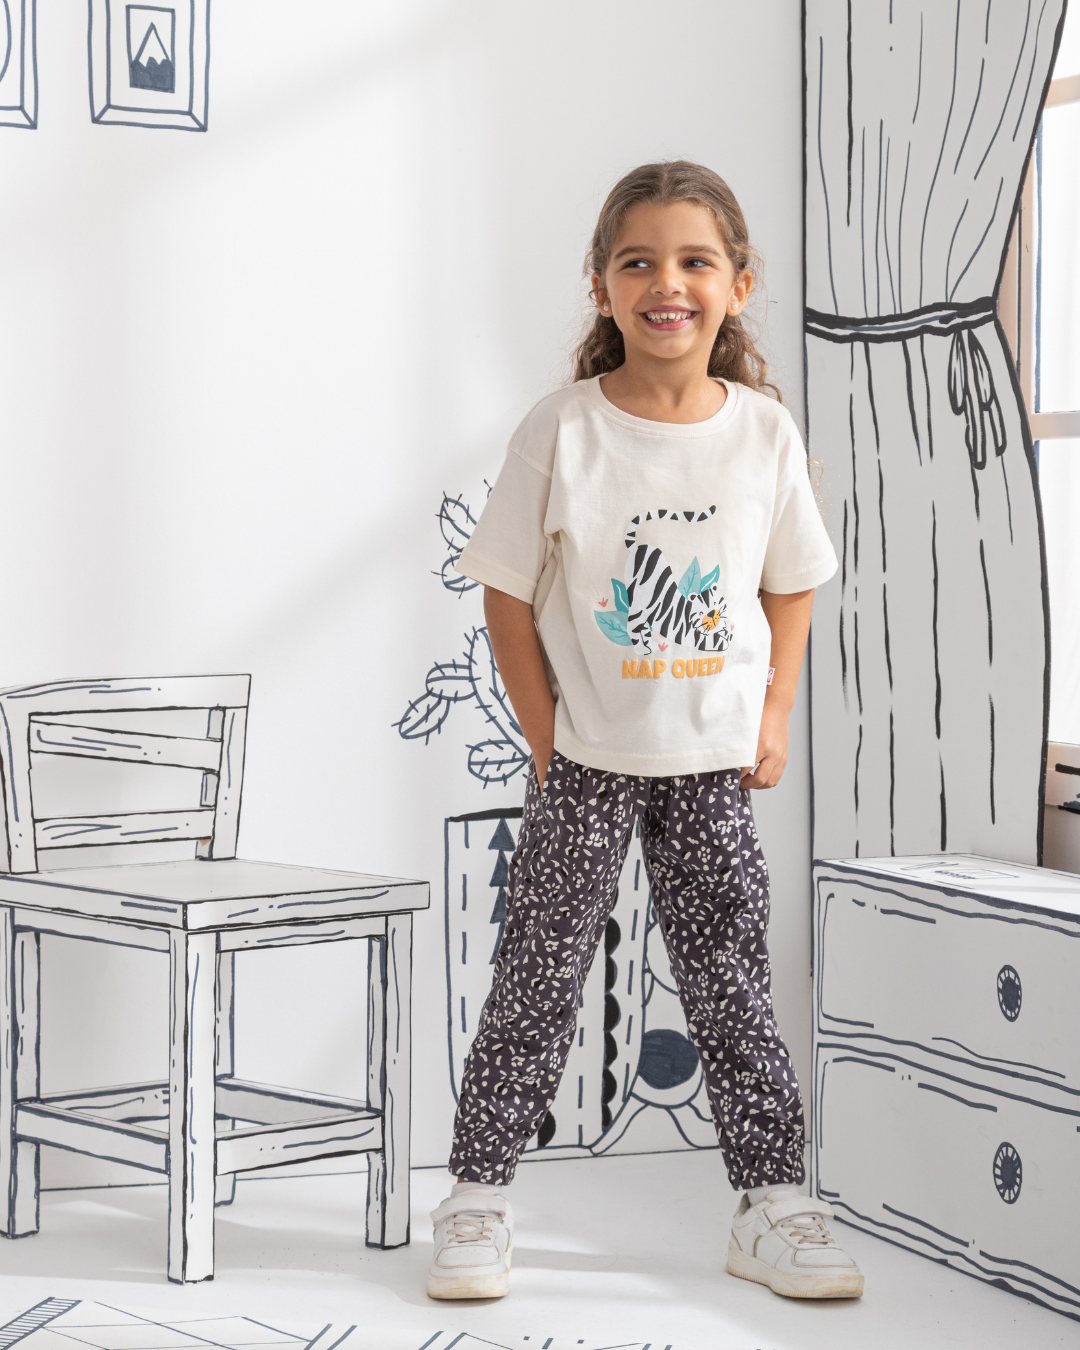 Nap Queen girls' half-sleeved cotton pajamas * printed trousers